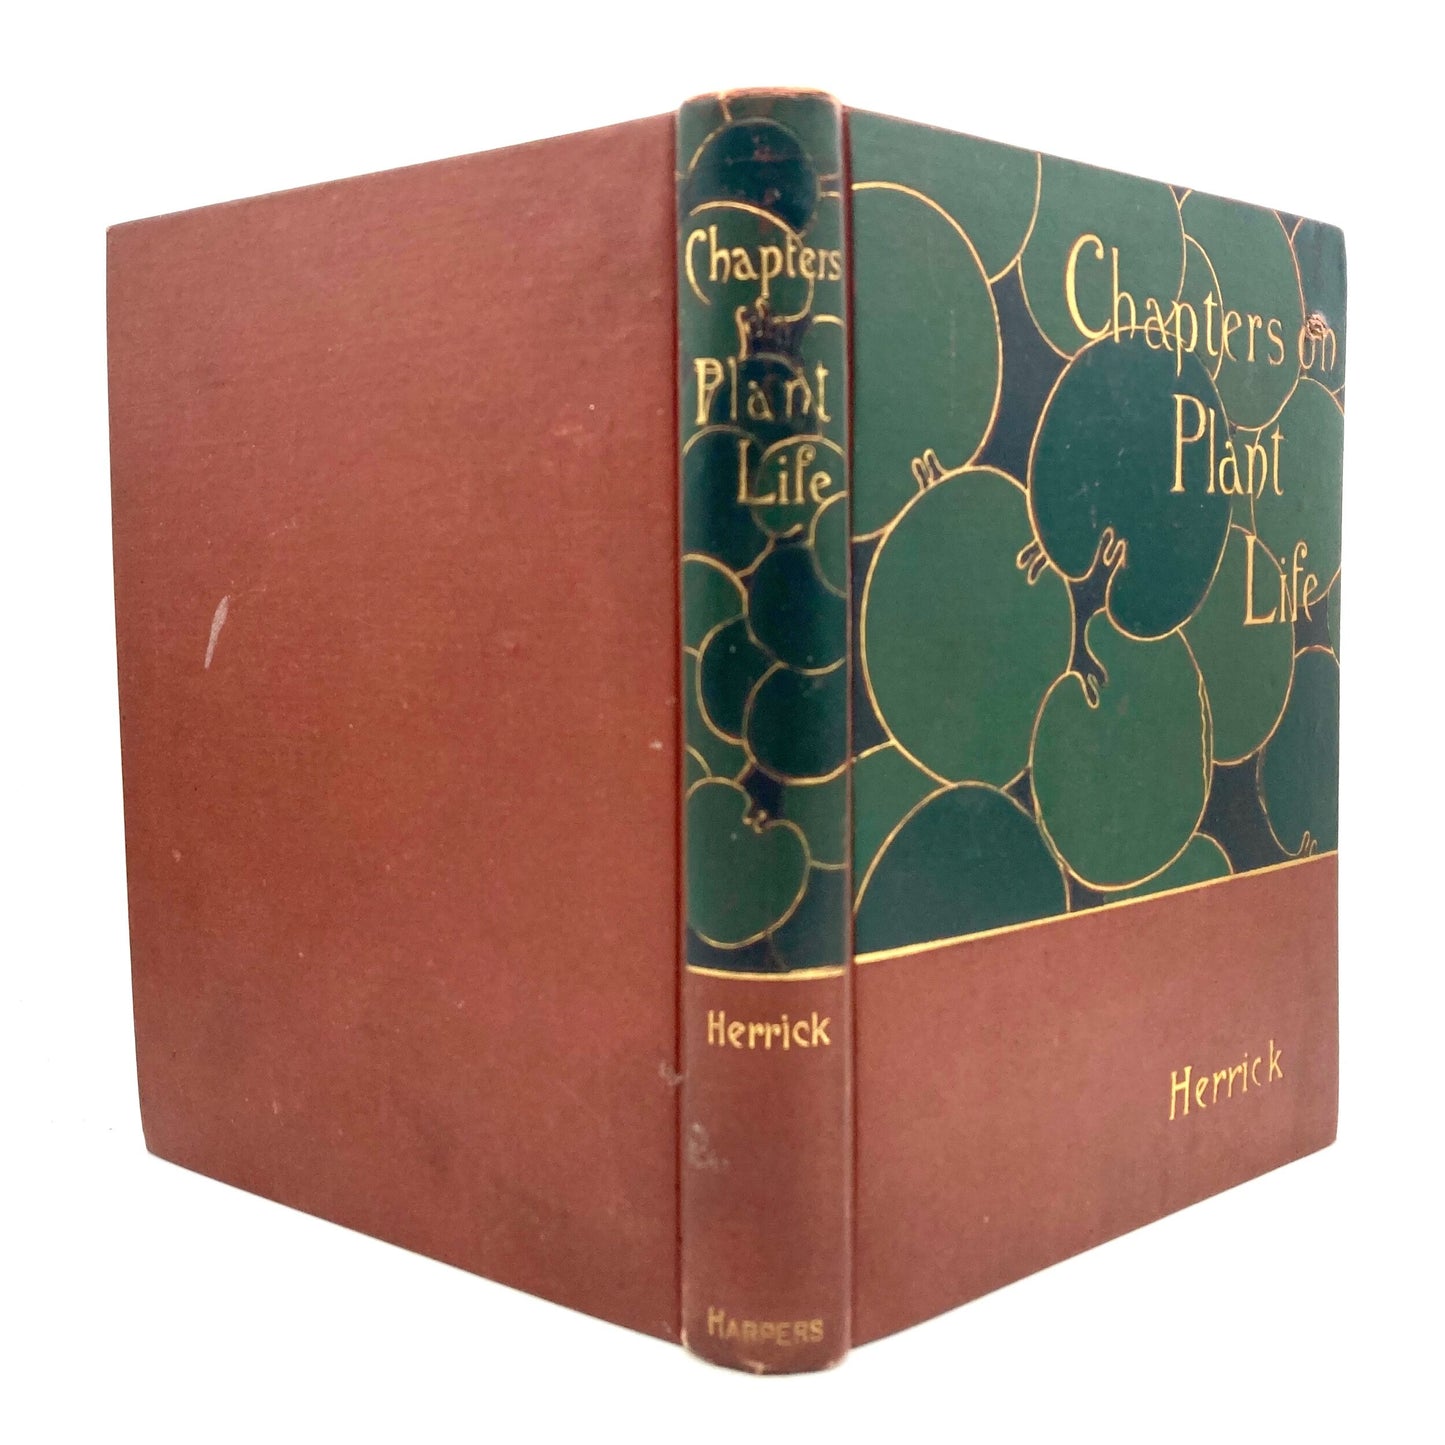 HERRICK, Sophie Bledsoe "Chapters on Plant Life" [Harper & Brothers, 1885] - Buzz Bookstore